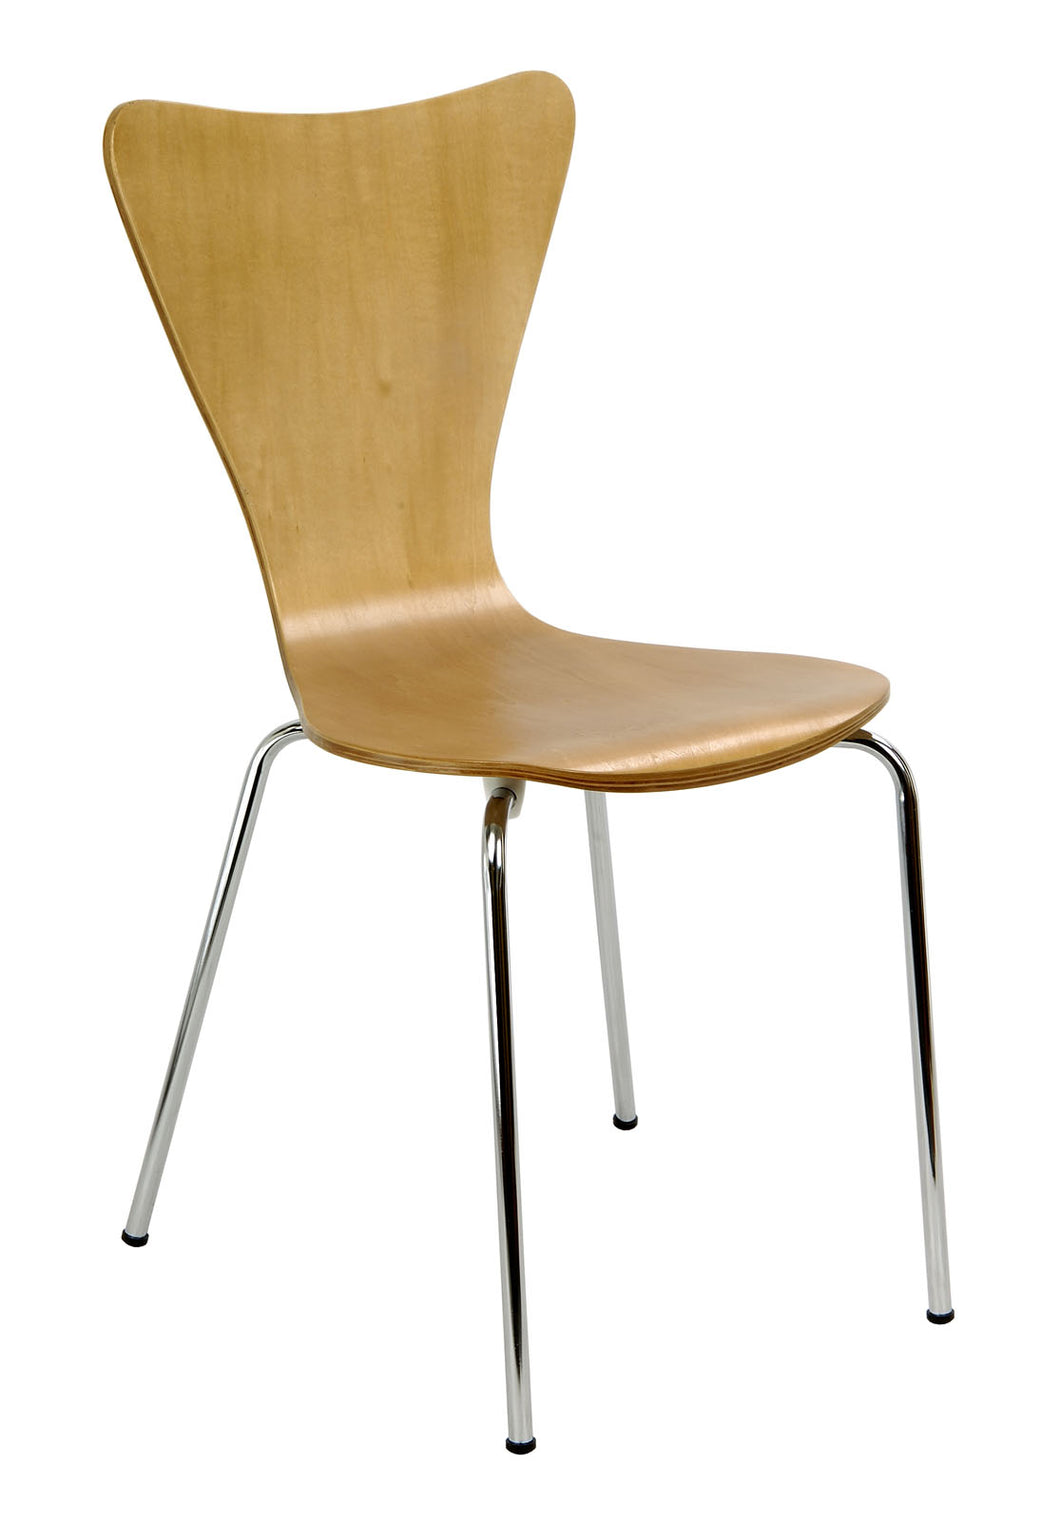 Legare Furniture Bent Plywood Chair, 34